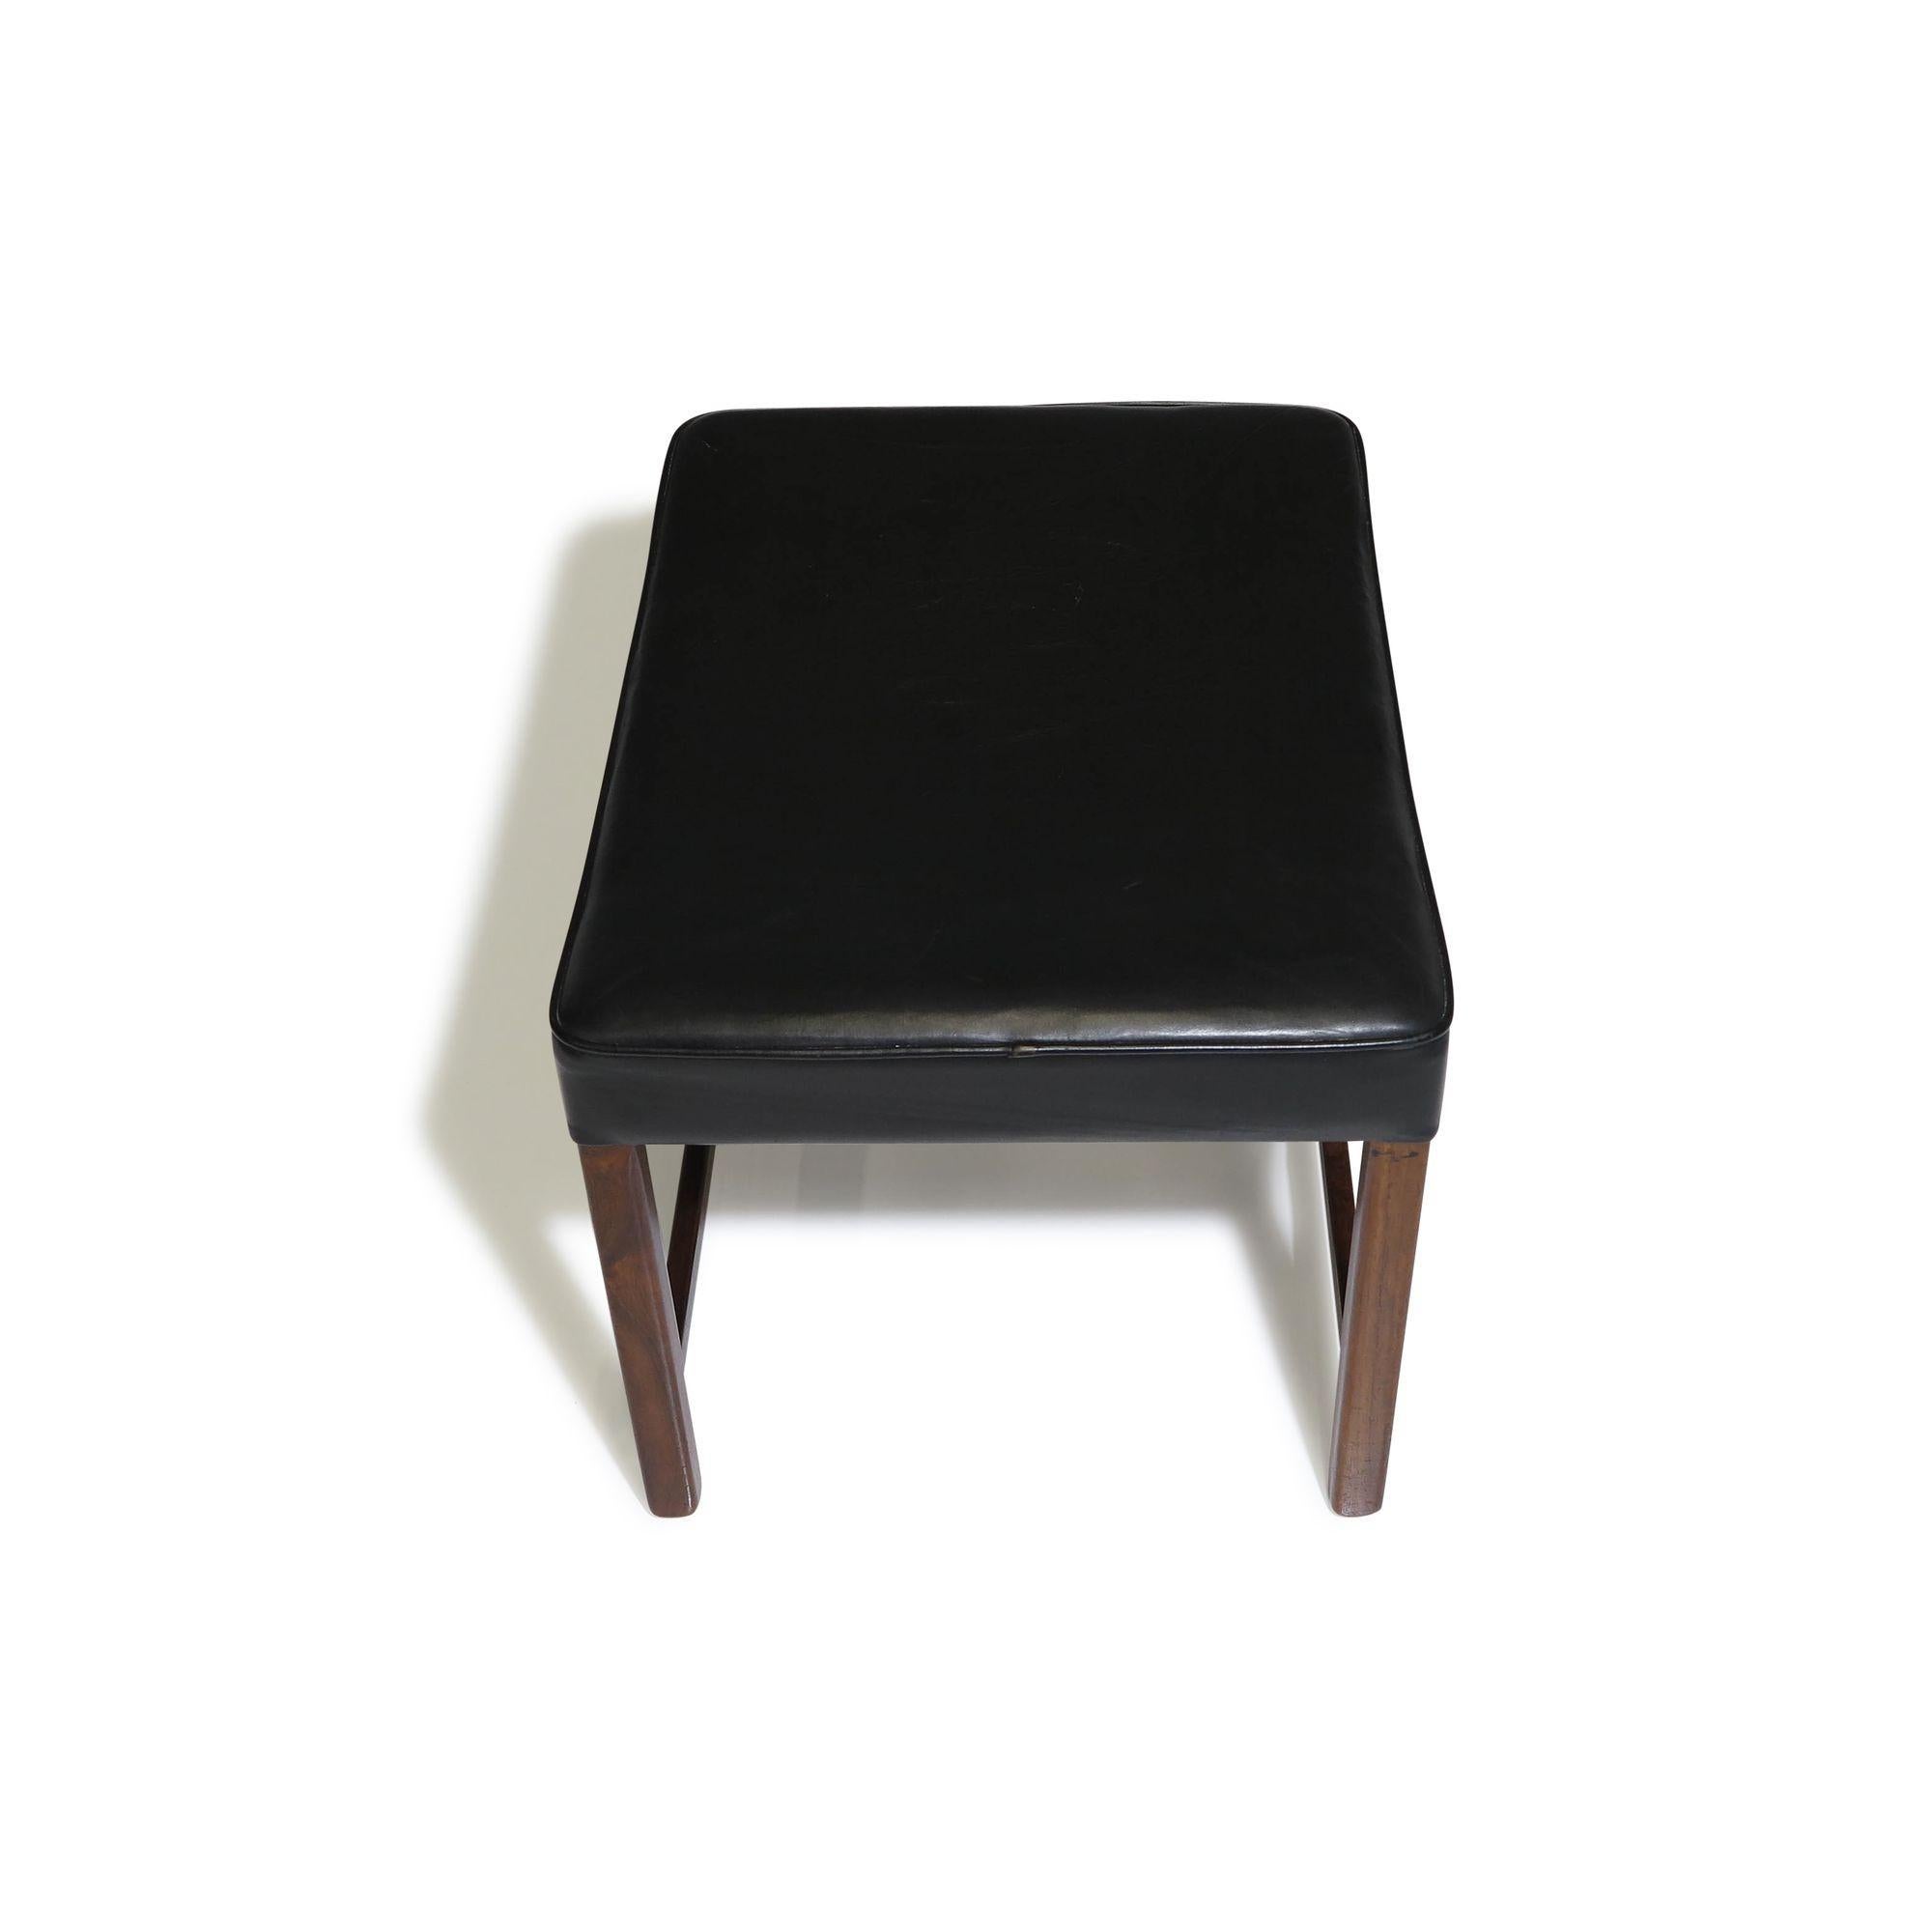 20th Century Fredrik Kayser Danish Rosewood Ottoman or Bench in Black Leather For Sale